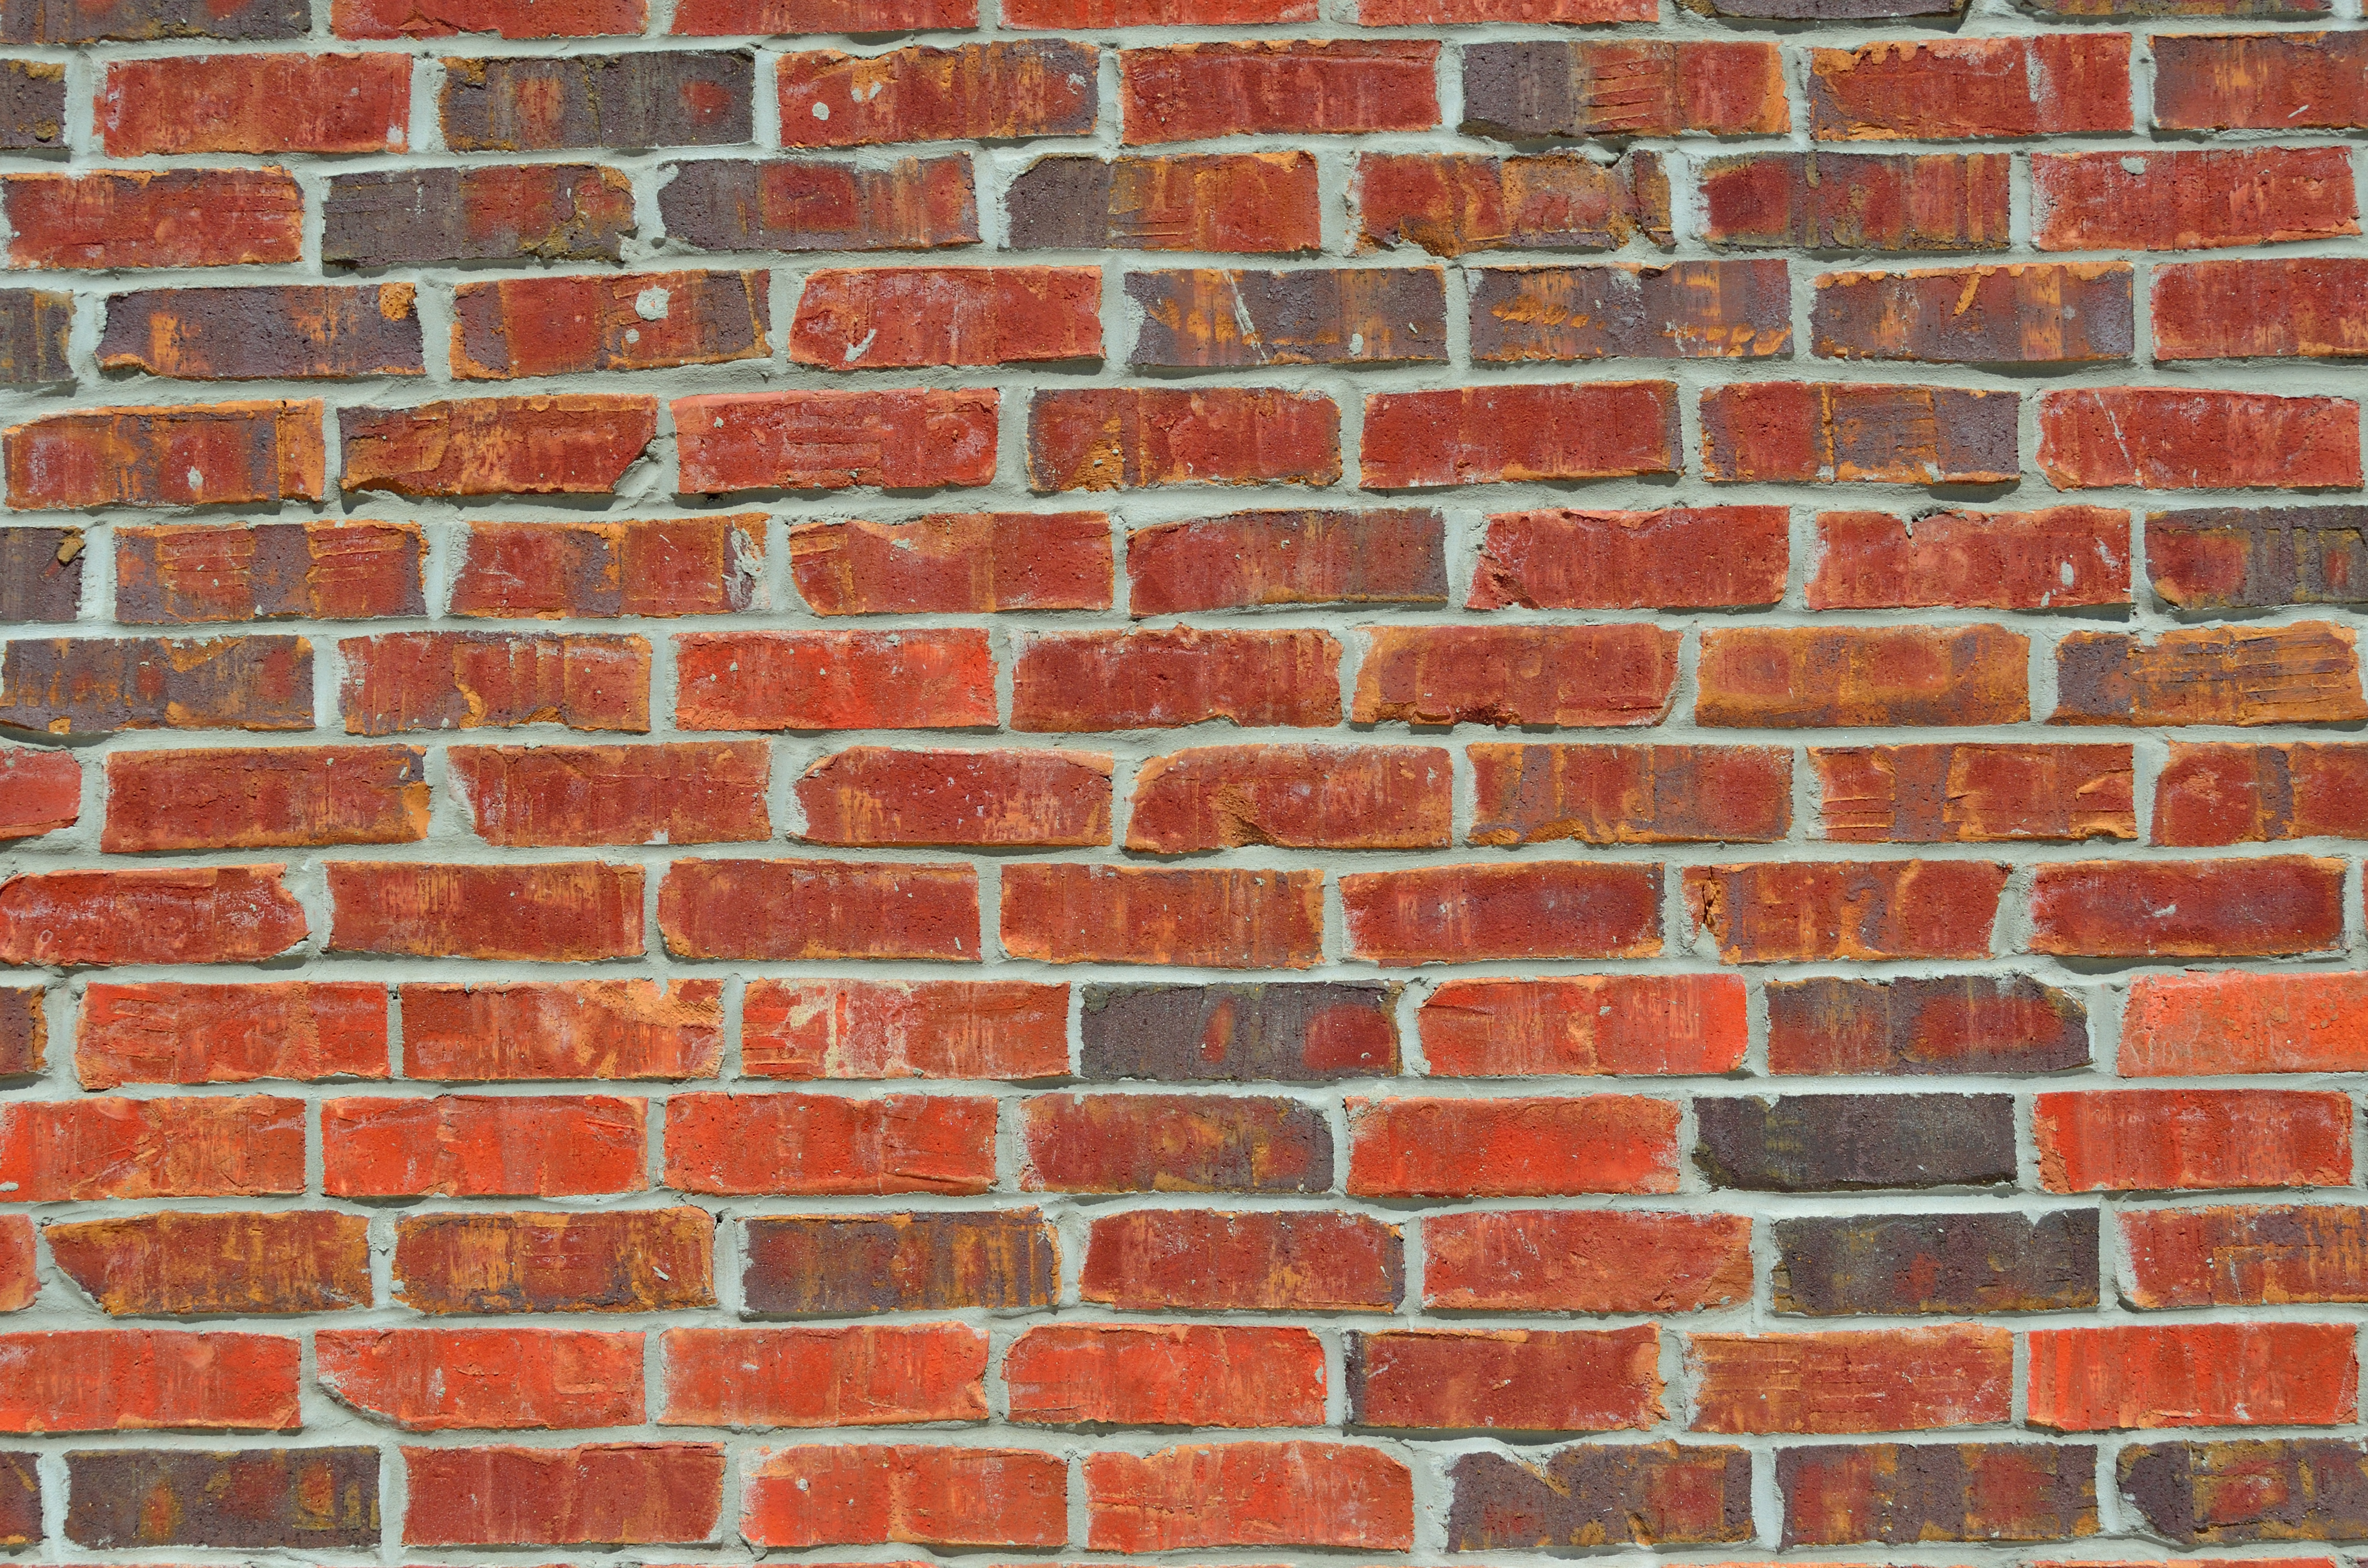 brick, surface, red, texture, textures, wall